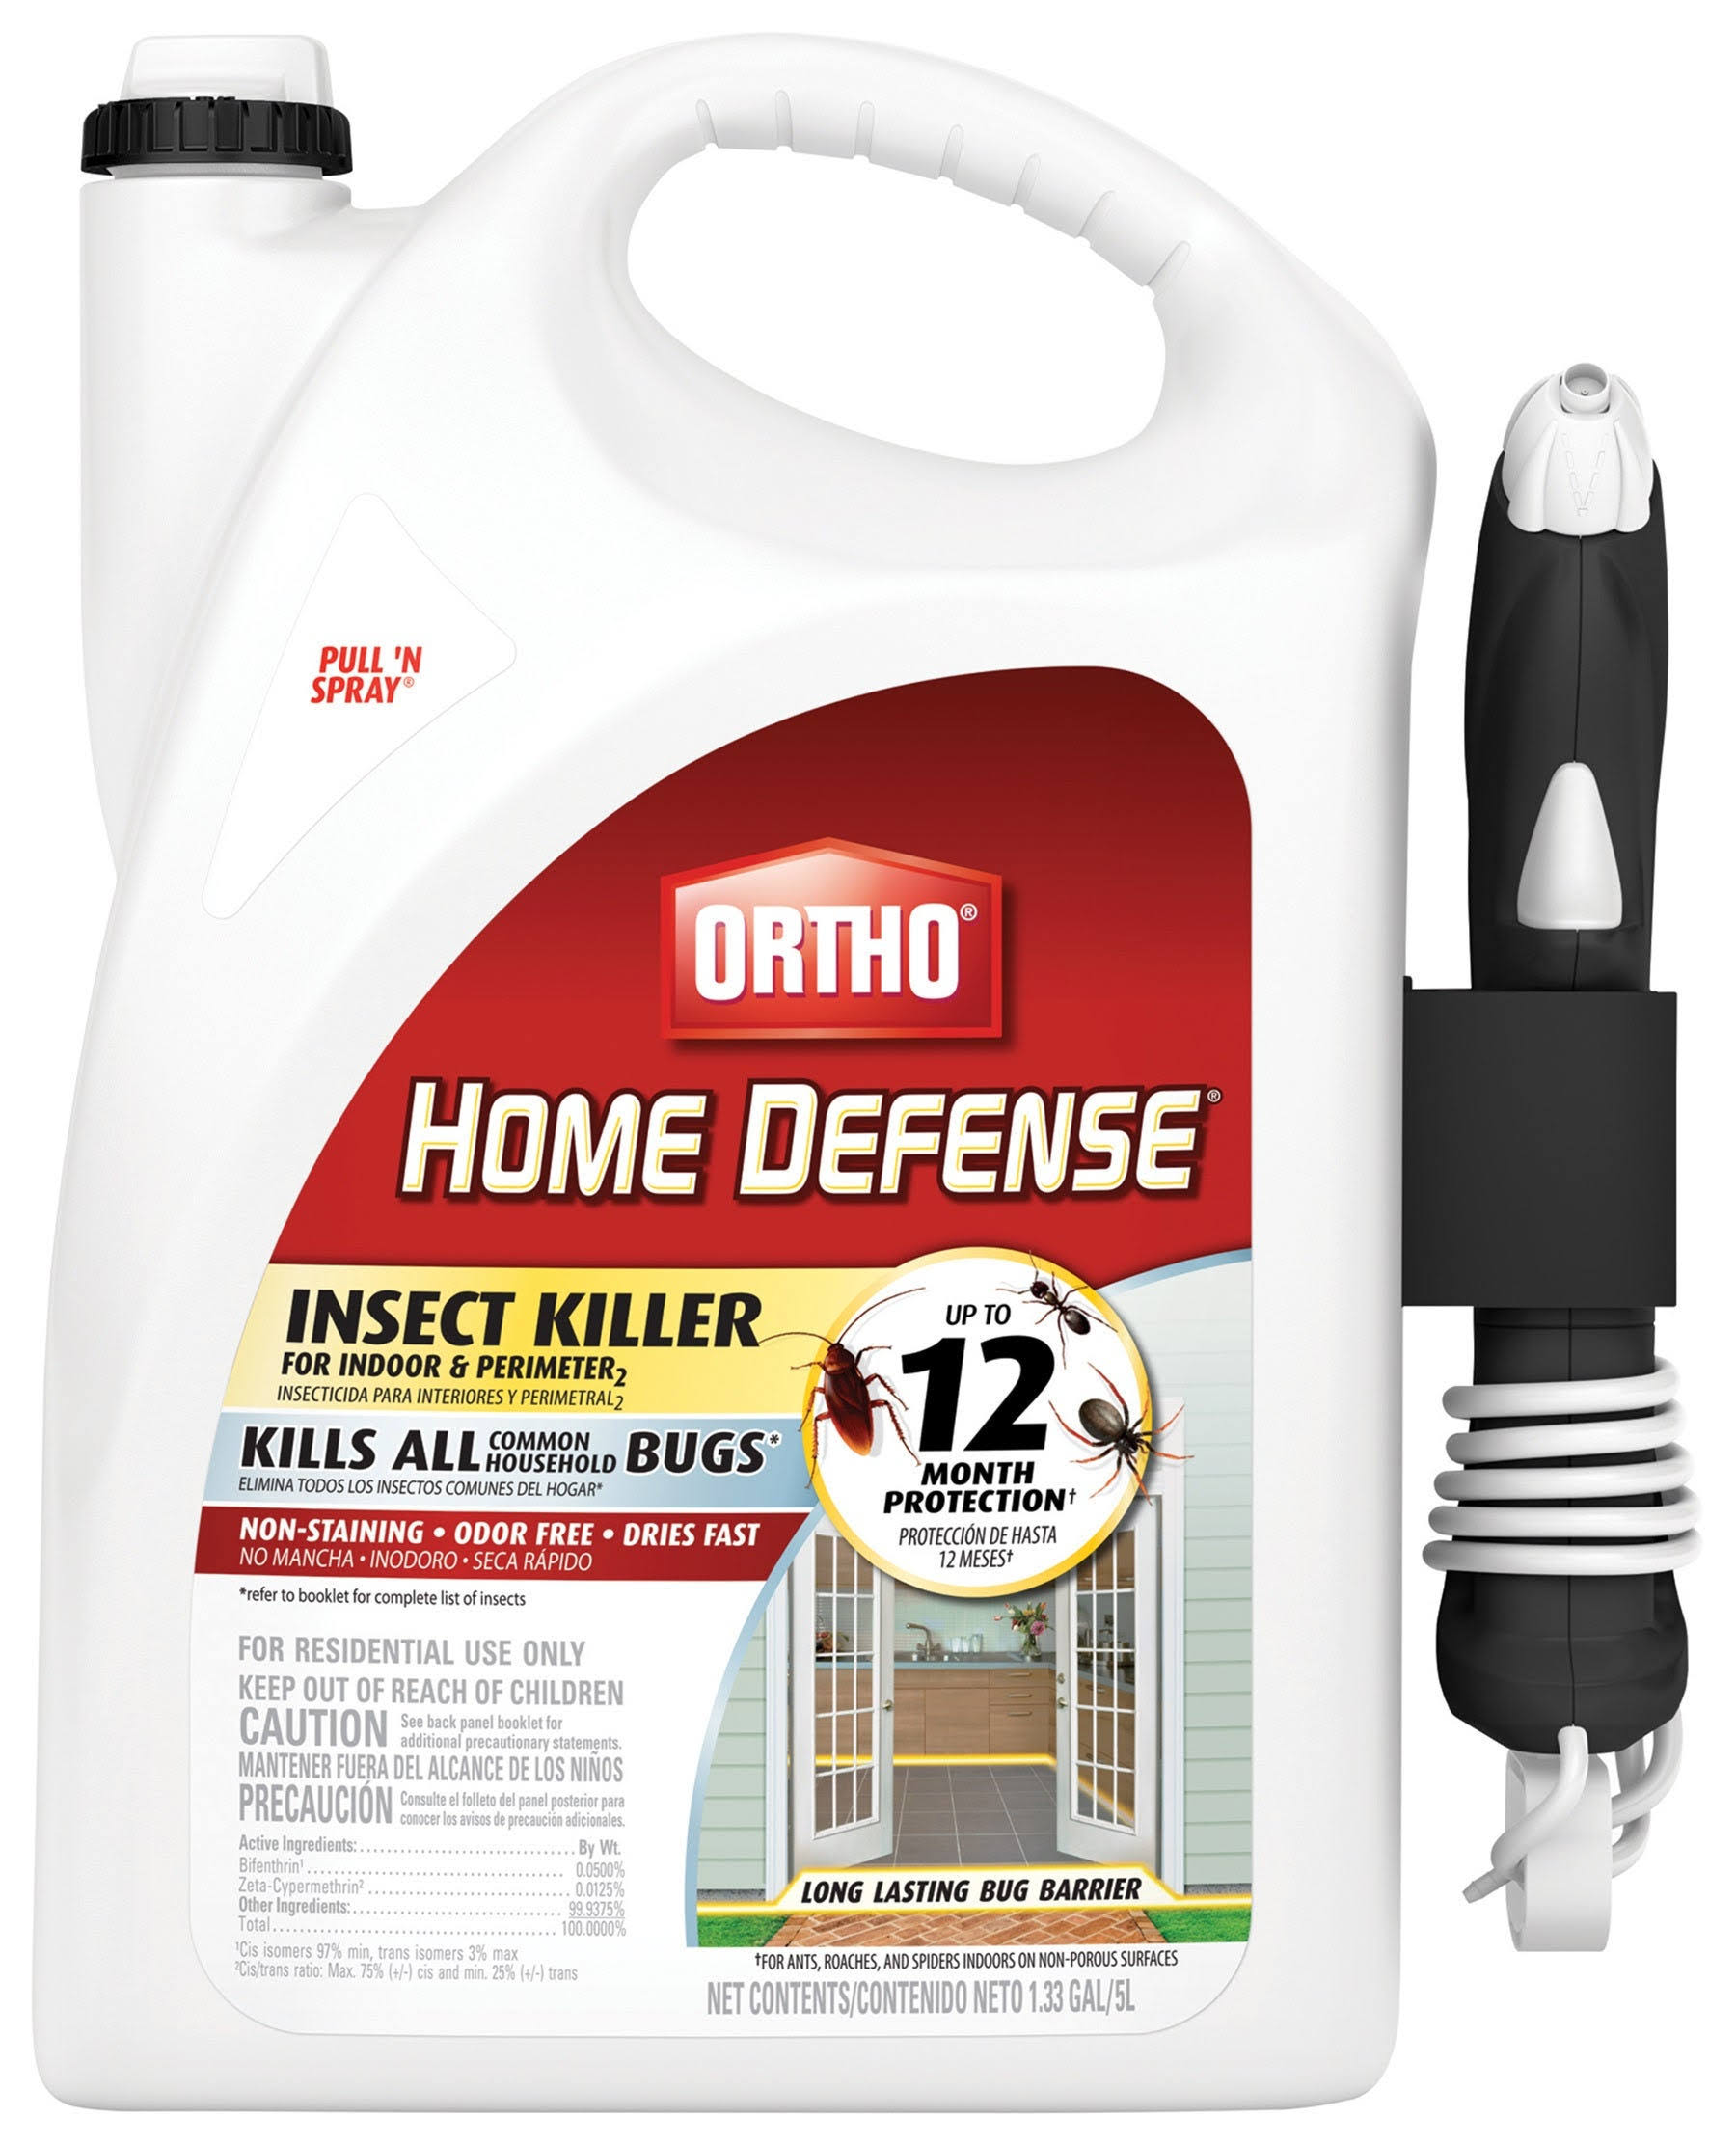 Ortho Home Defense Max Insect Killer for Indoor and Perimeter with Wand